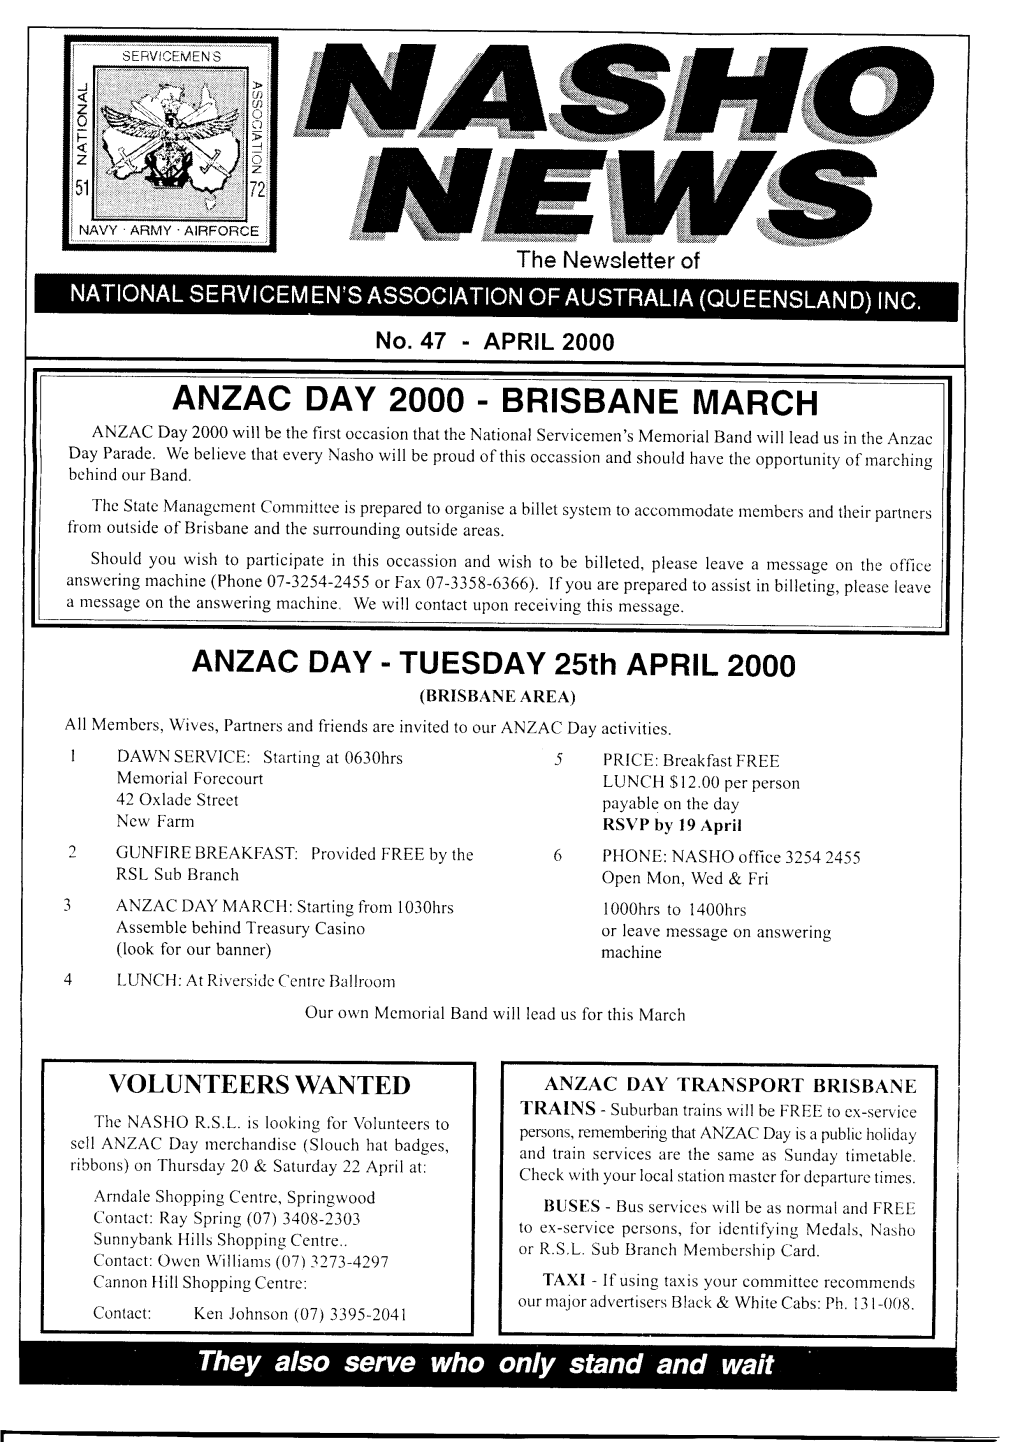 ANZAC DAY 2OOO . BRISBANE MARCH ANZAC Day 2000 Will Be the First Occasion That the National Servicemen's Memorial Band Will Lead Us in the Anzac Day Parade